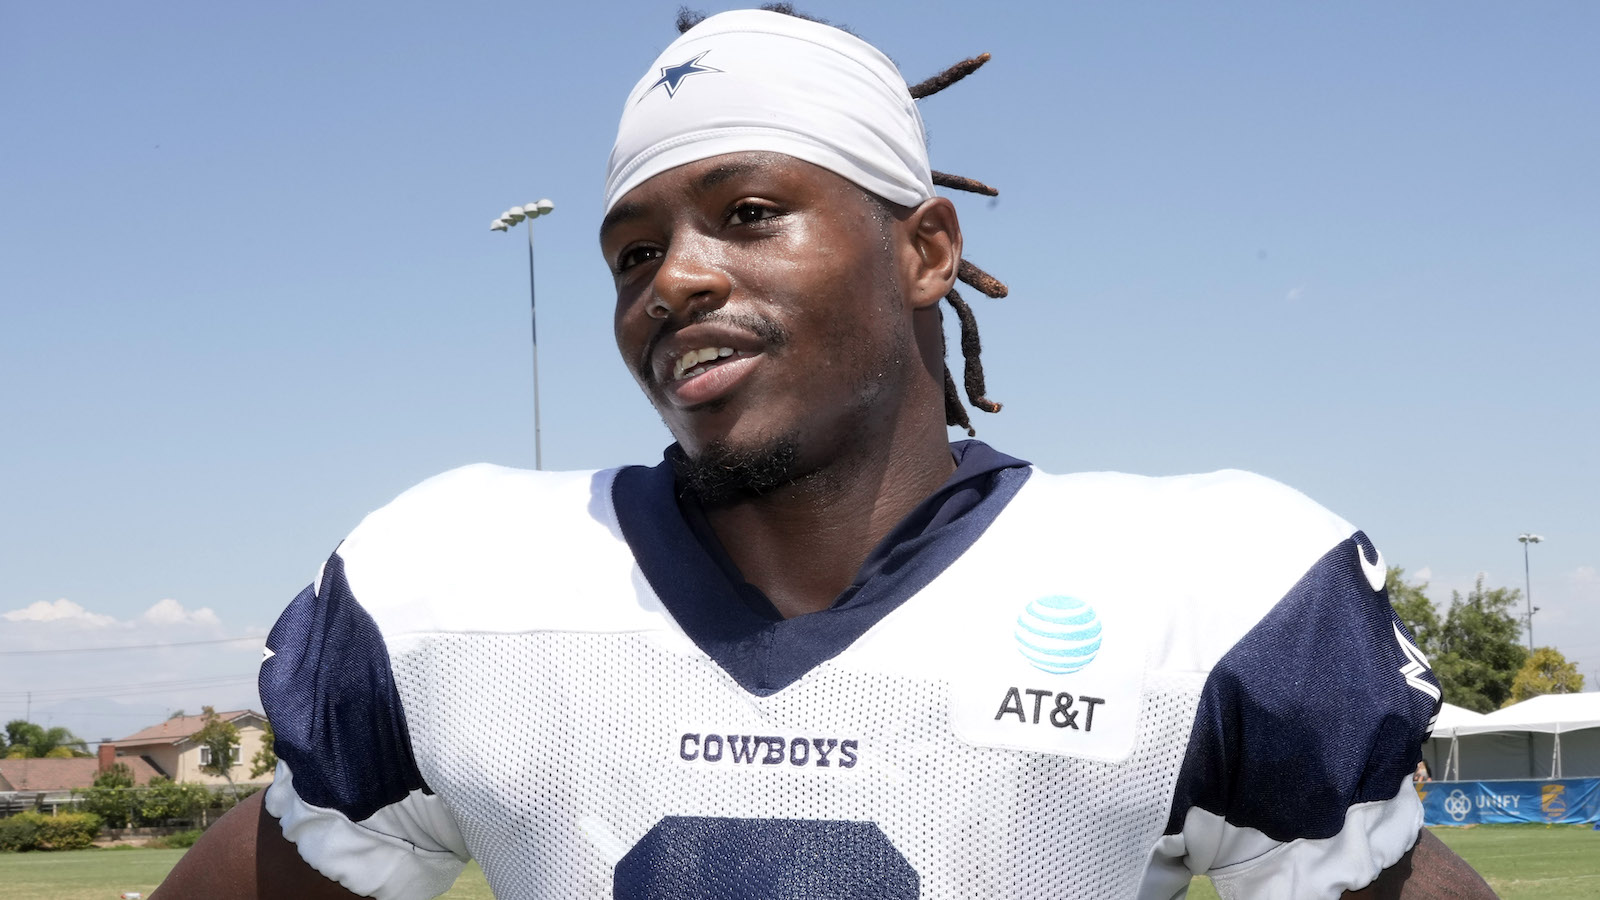 Cowboys' KaVontae Turpin shocked by Jerry Jones' Pro Bowl call